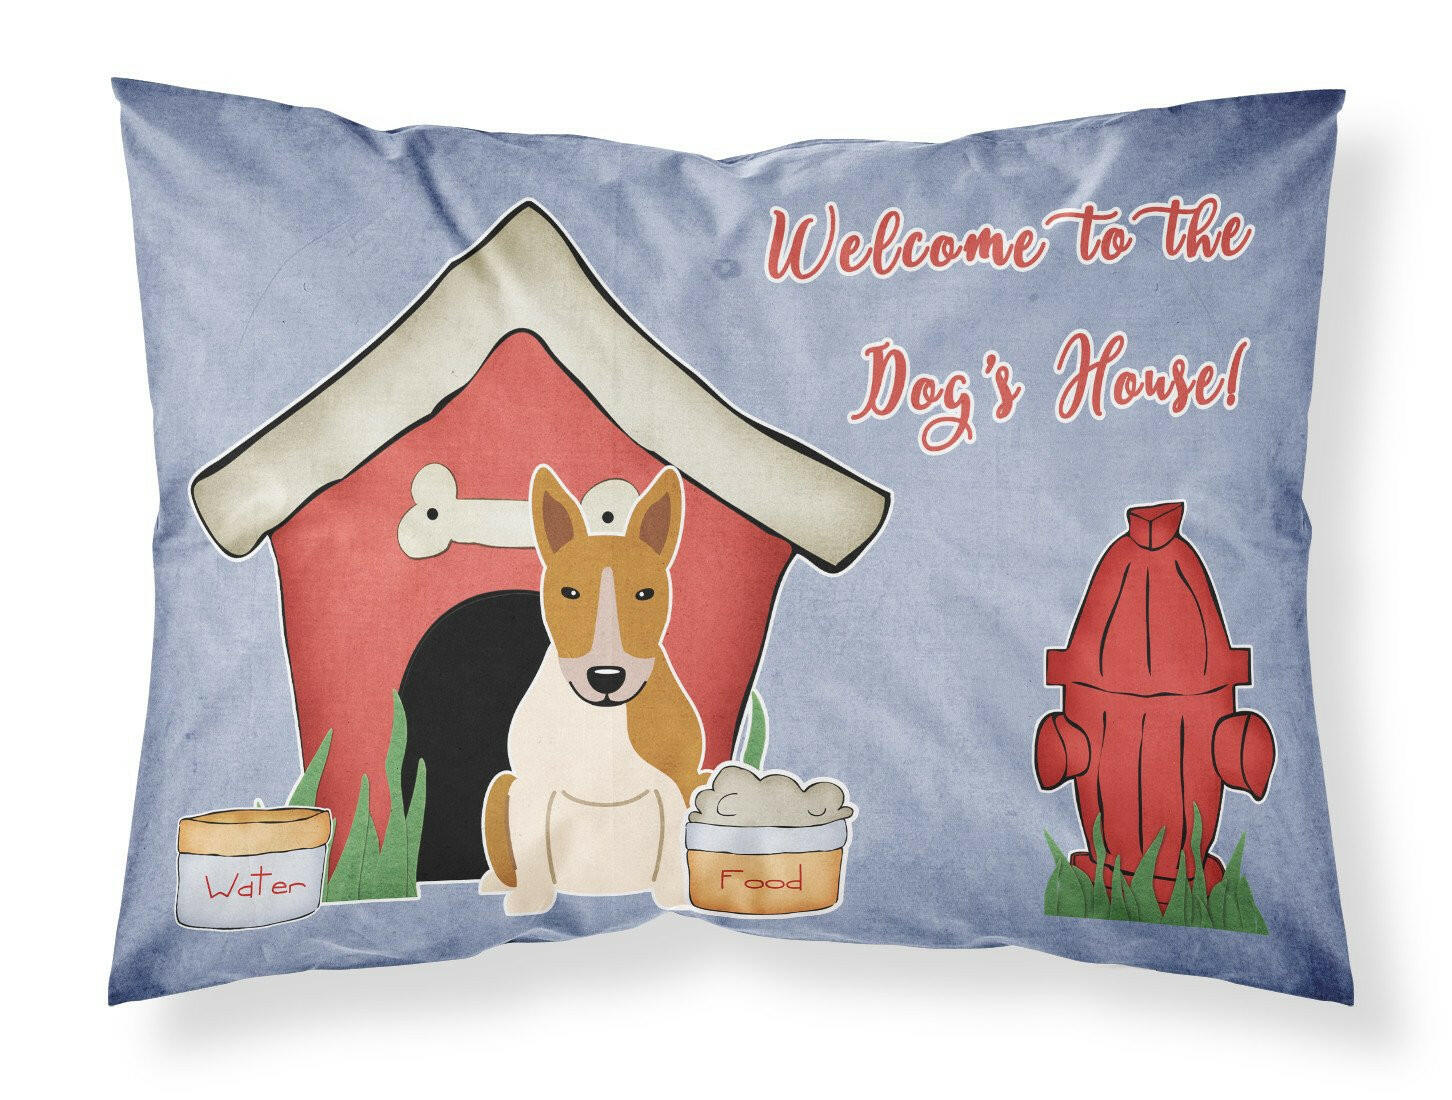 Dog House Collection Bull Terrier Red White Fabric Standard Pillowcase BB2889PILLOWCASE by Caroline's Treasures